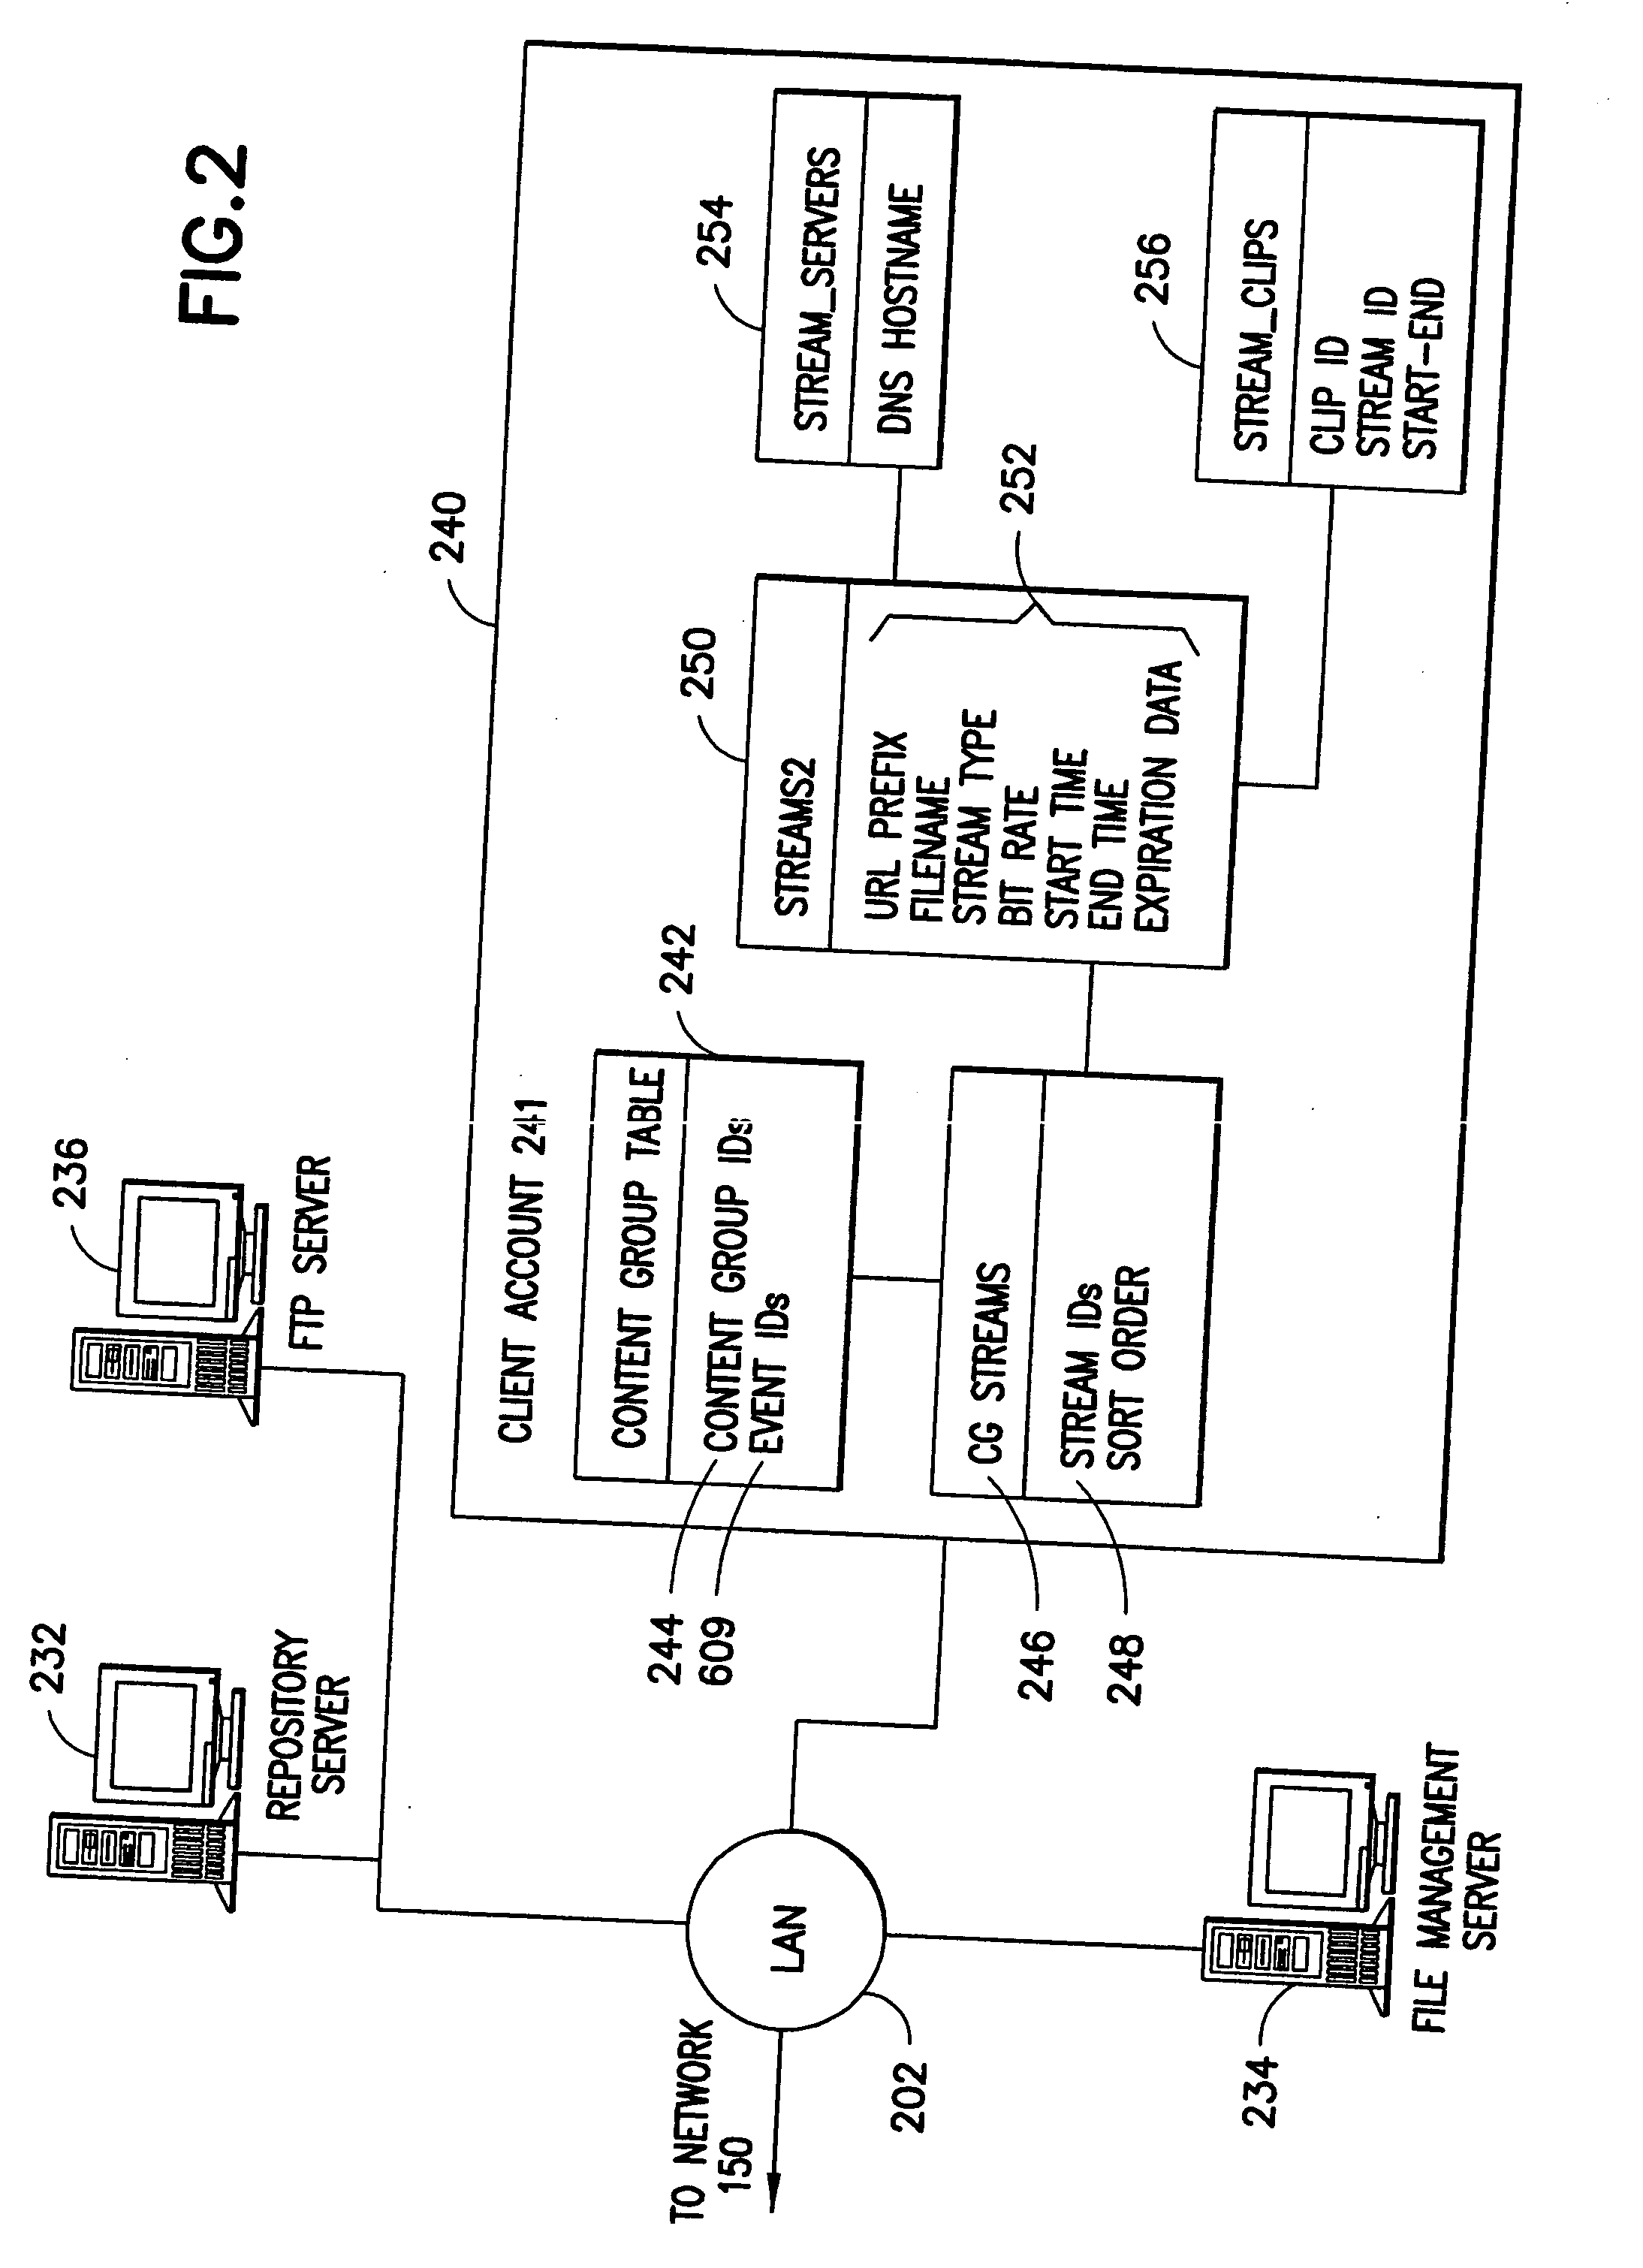 Method and system for producing and administering a web-cast event